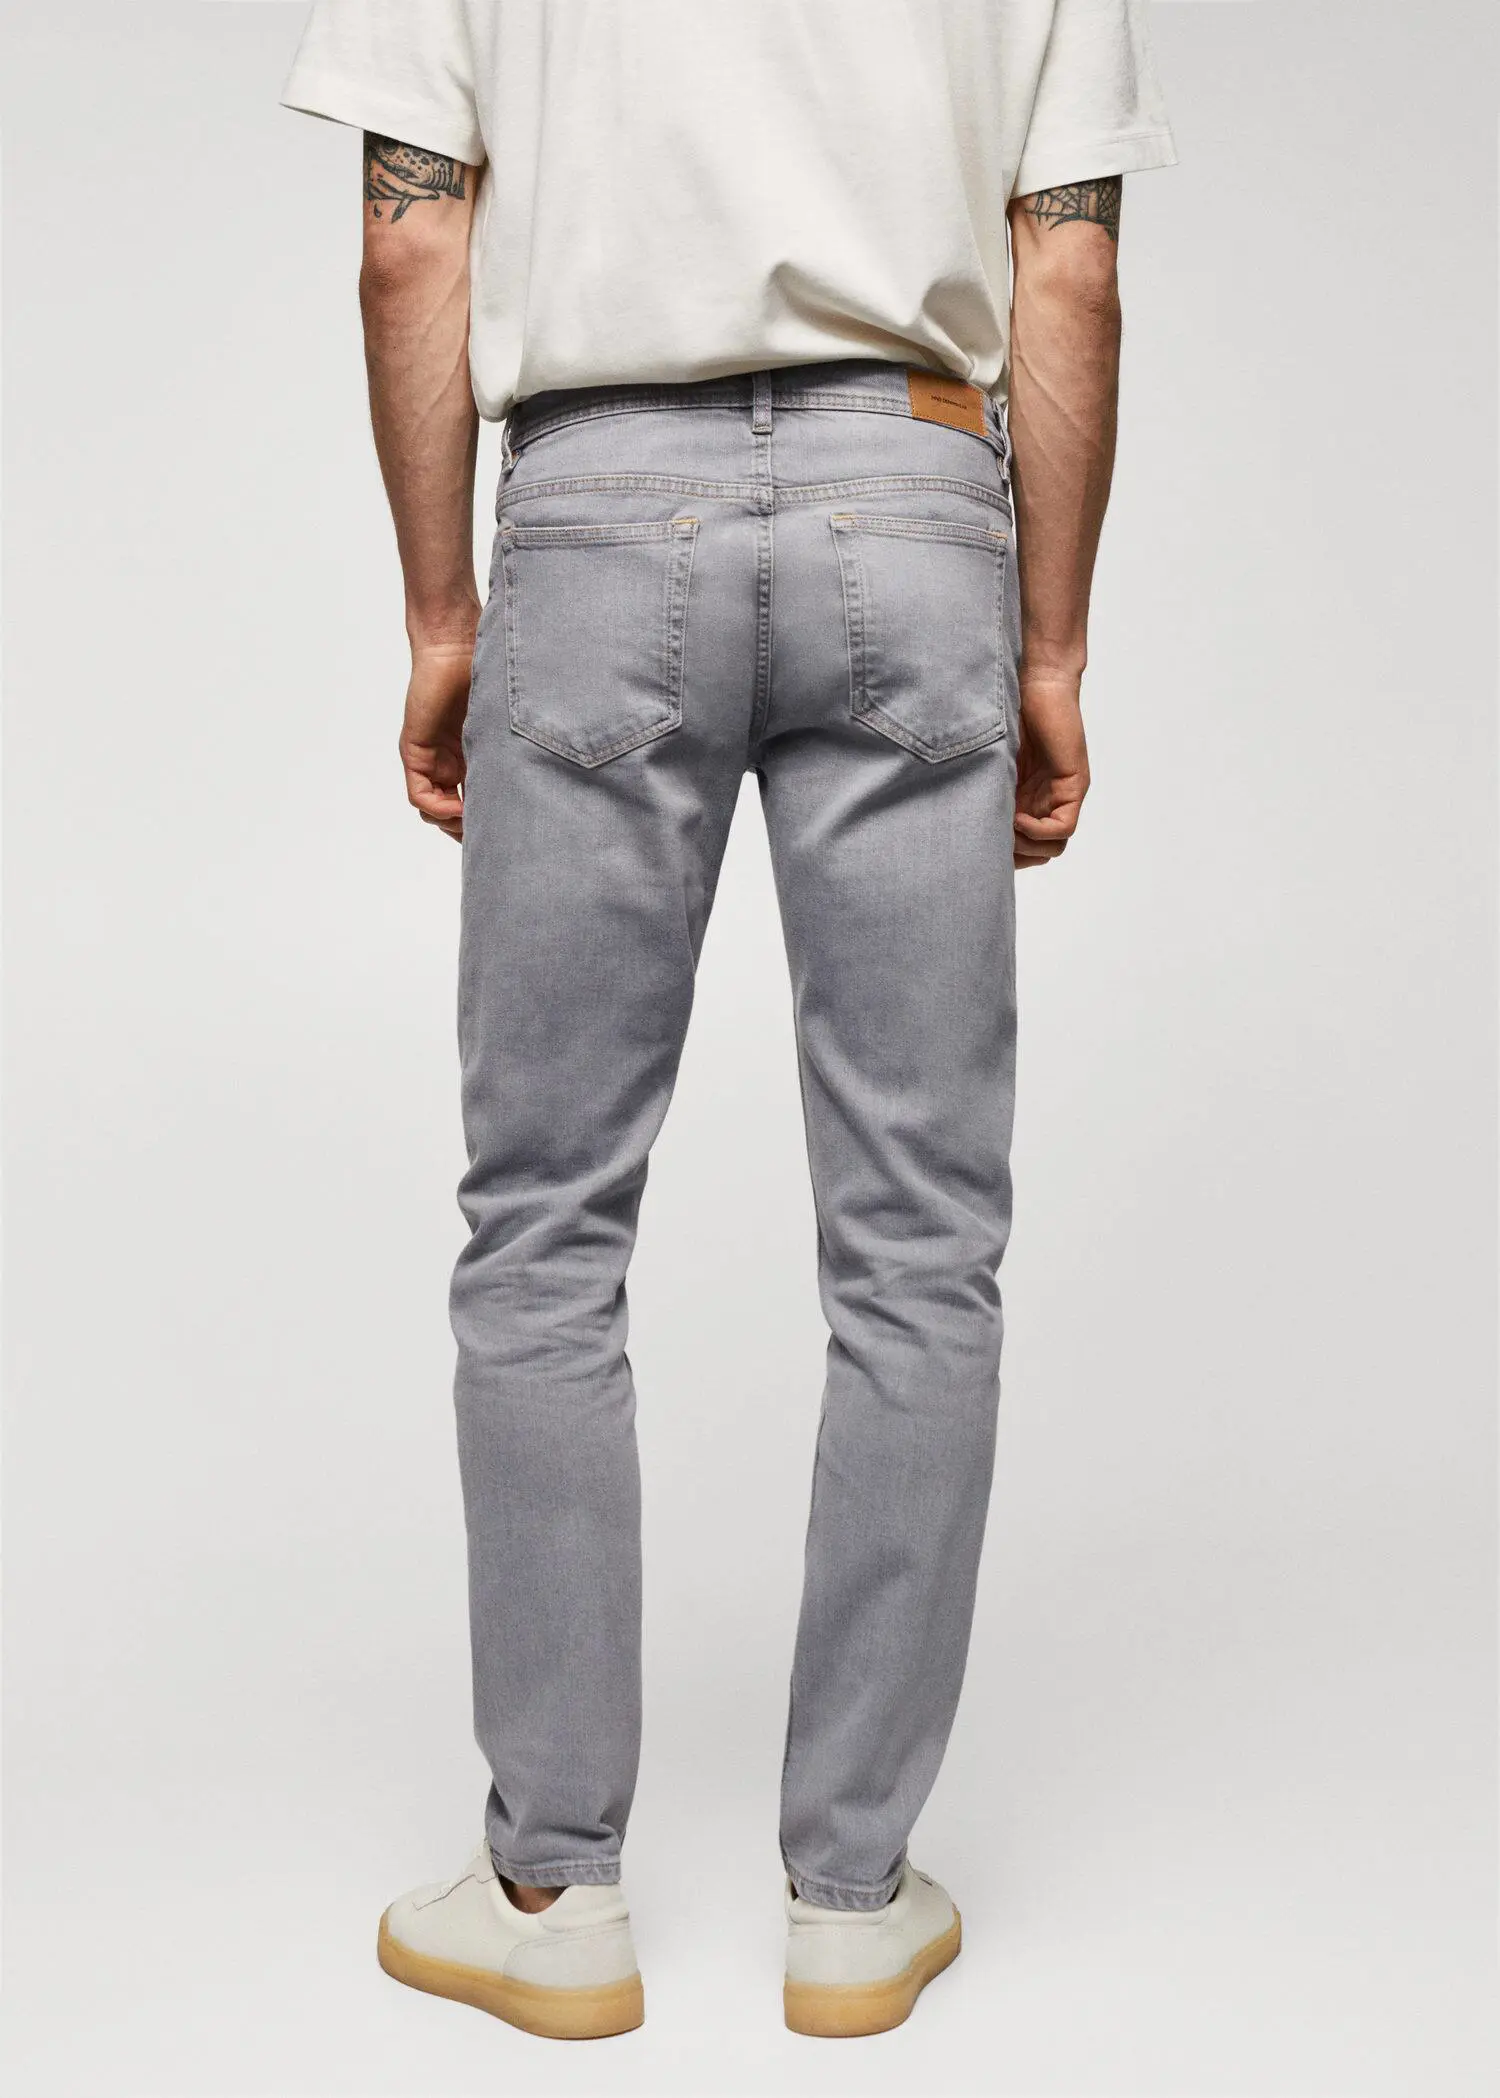 Mango Jan slim-fit jeans. a person wearing grey pants and a white shirt. 